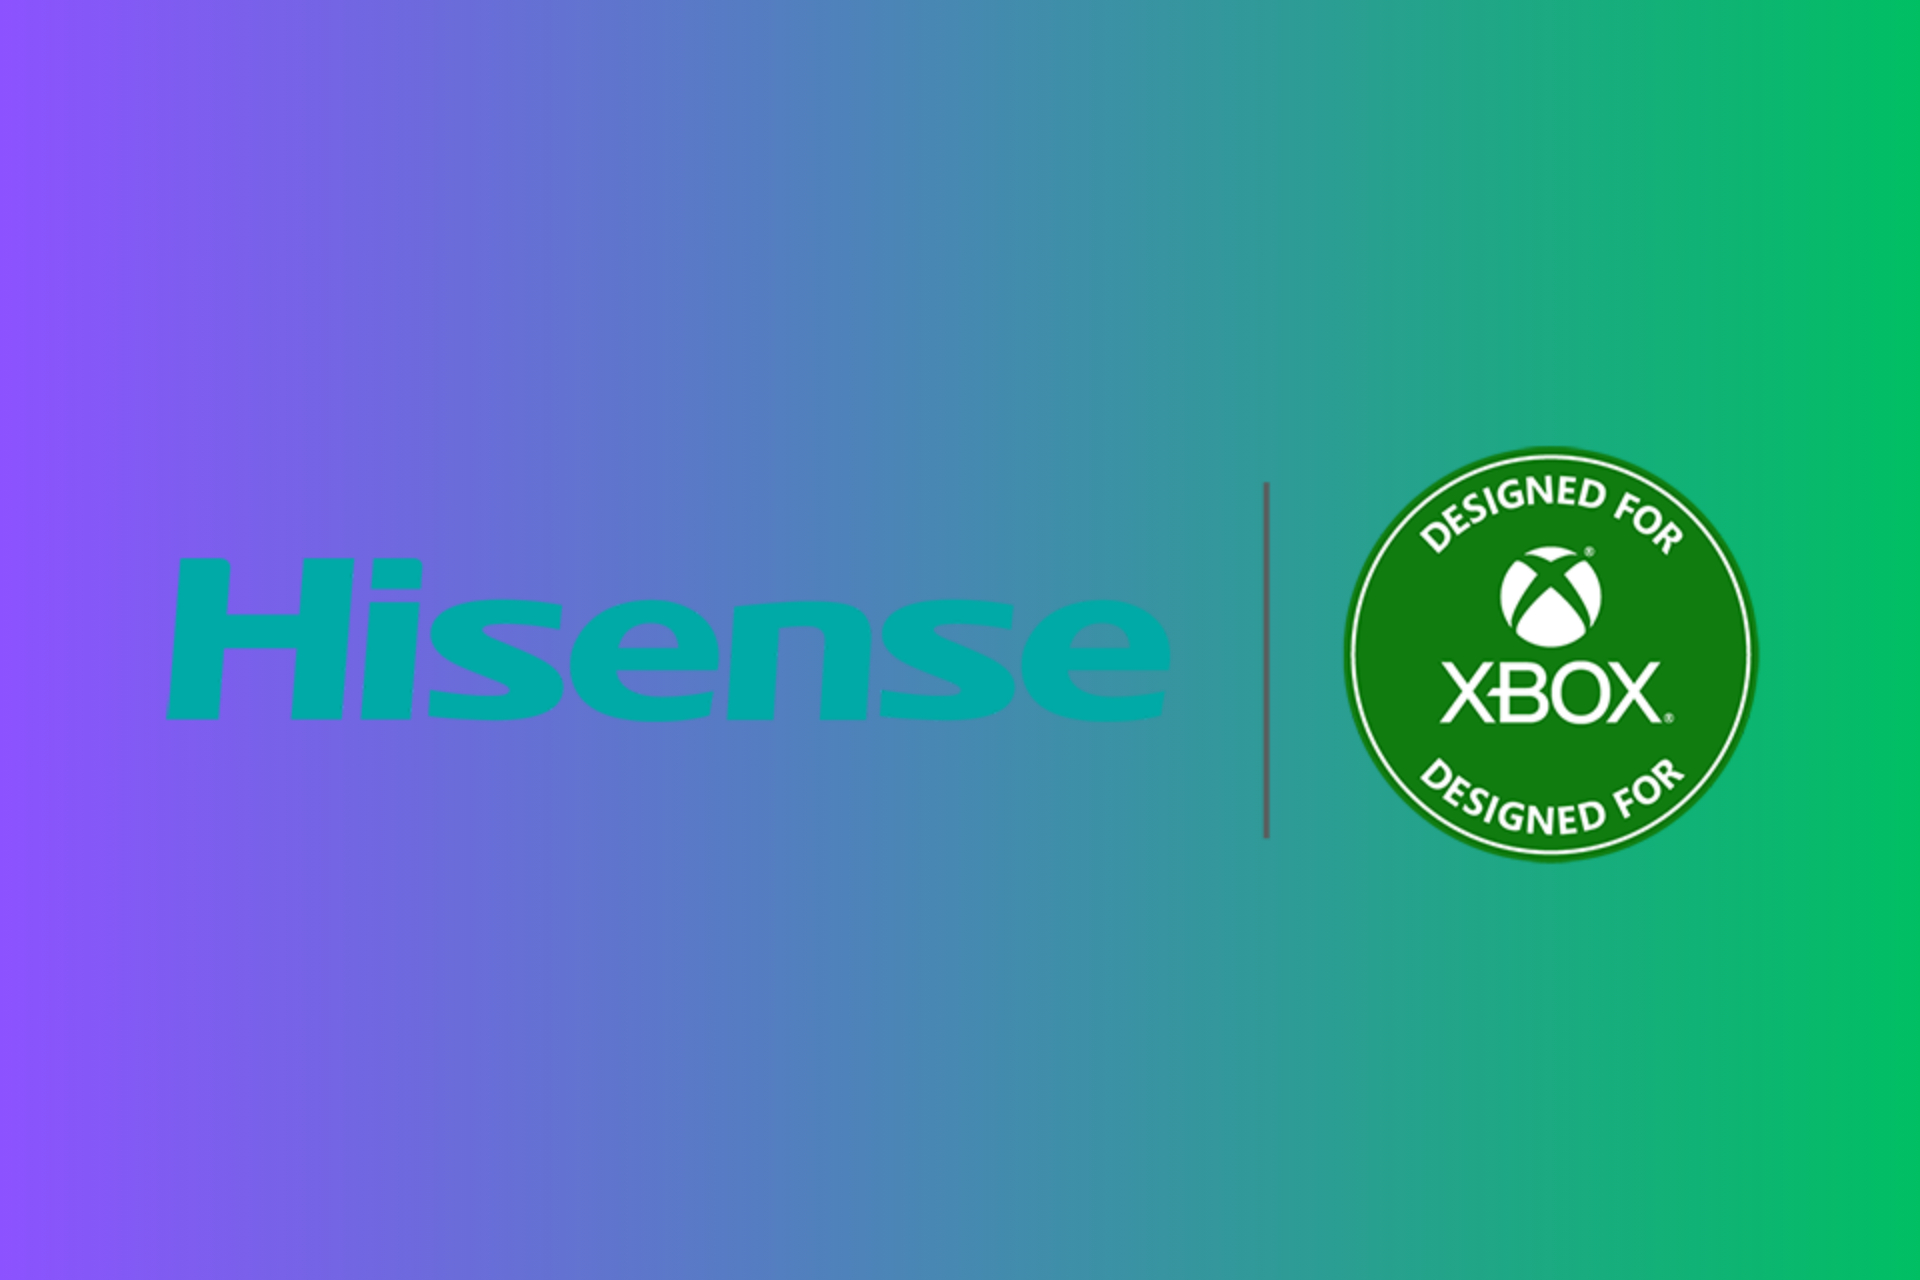 Hisense is making Xbox ready laser projection TVs for gaming